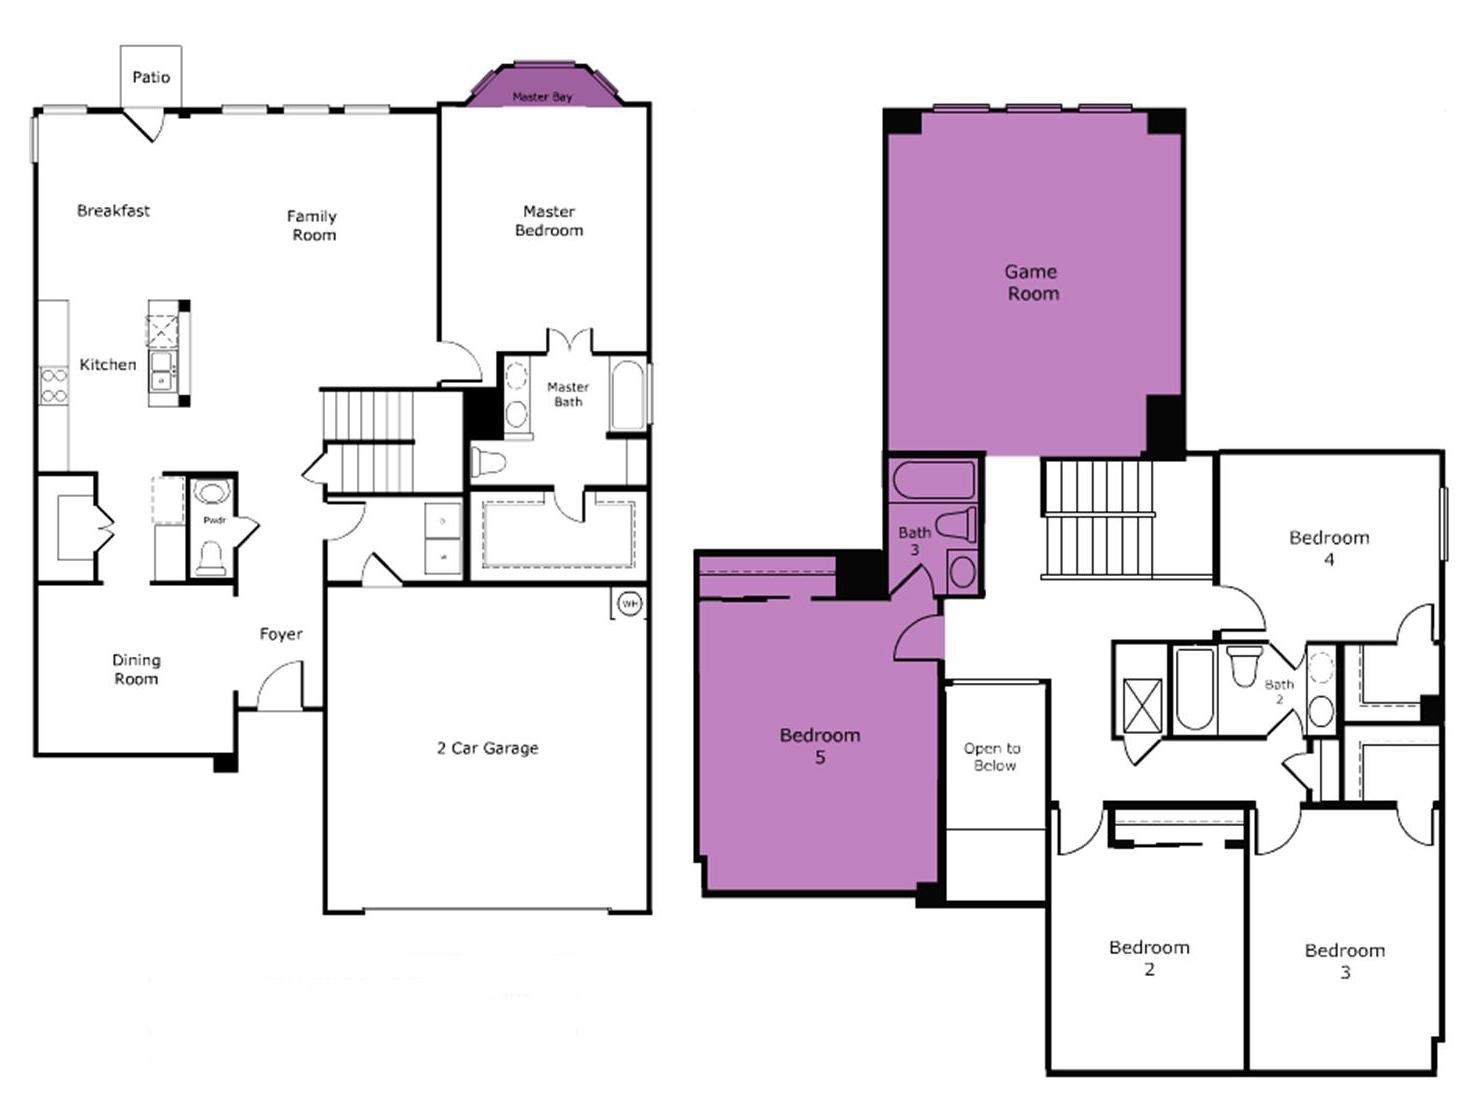 Family Room Addition Plans Room Addition Floor Plans, one